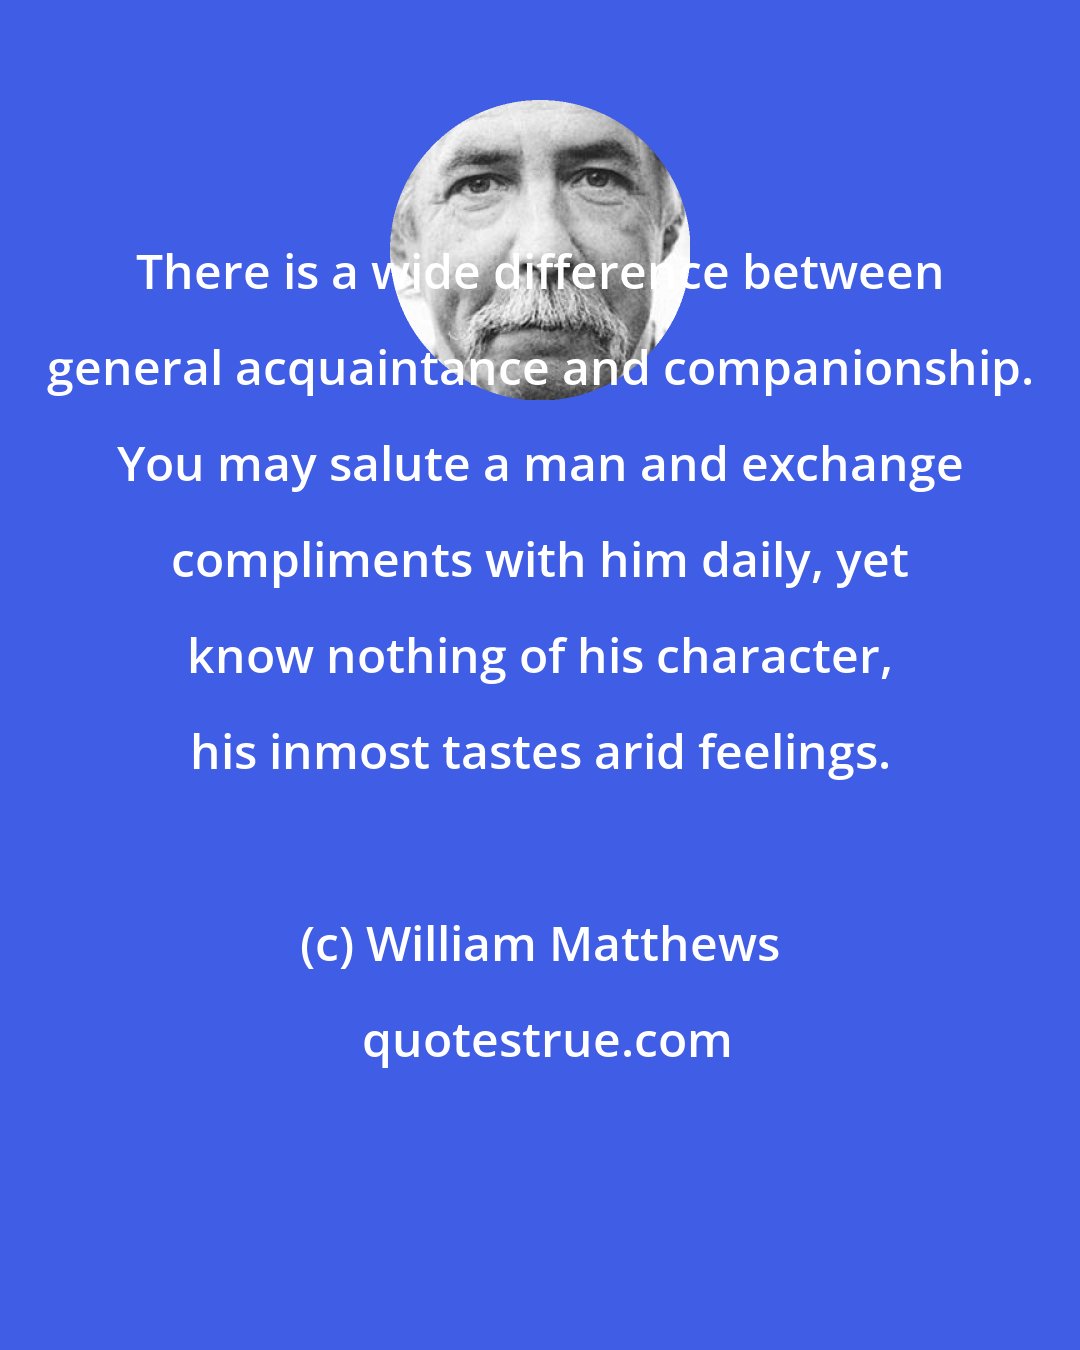 William Matthews: There is a wide difference between general acquaintance and companionship. You may salute a man and exchange compliments with him daily, yet know nothing of his character, his inmost tastes arid feelings.